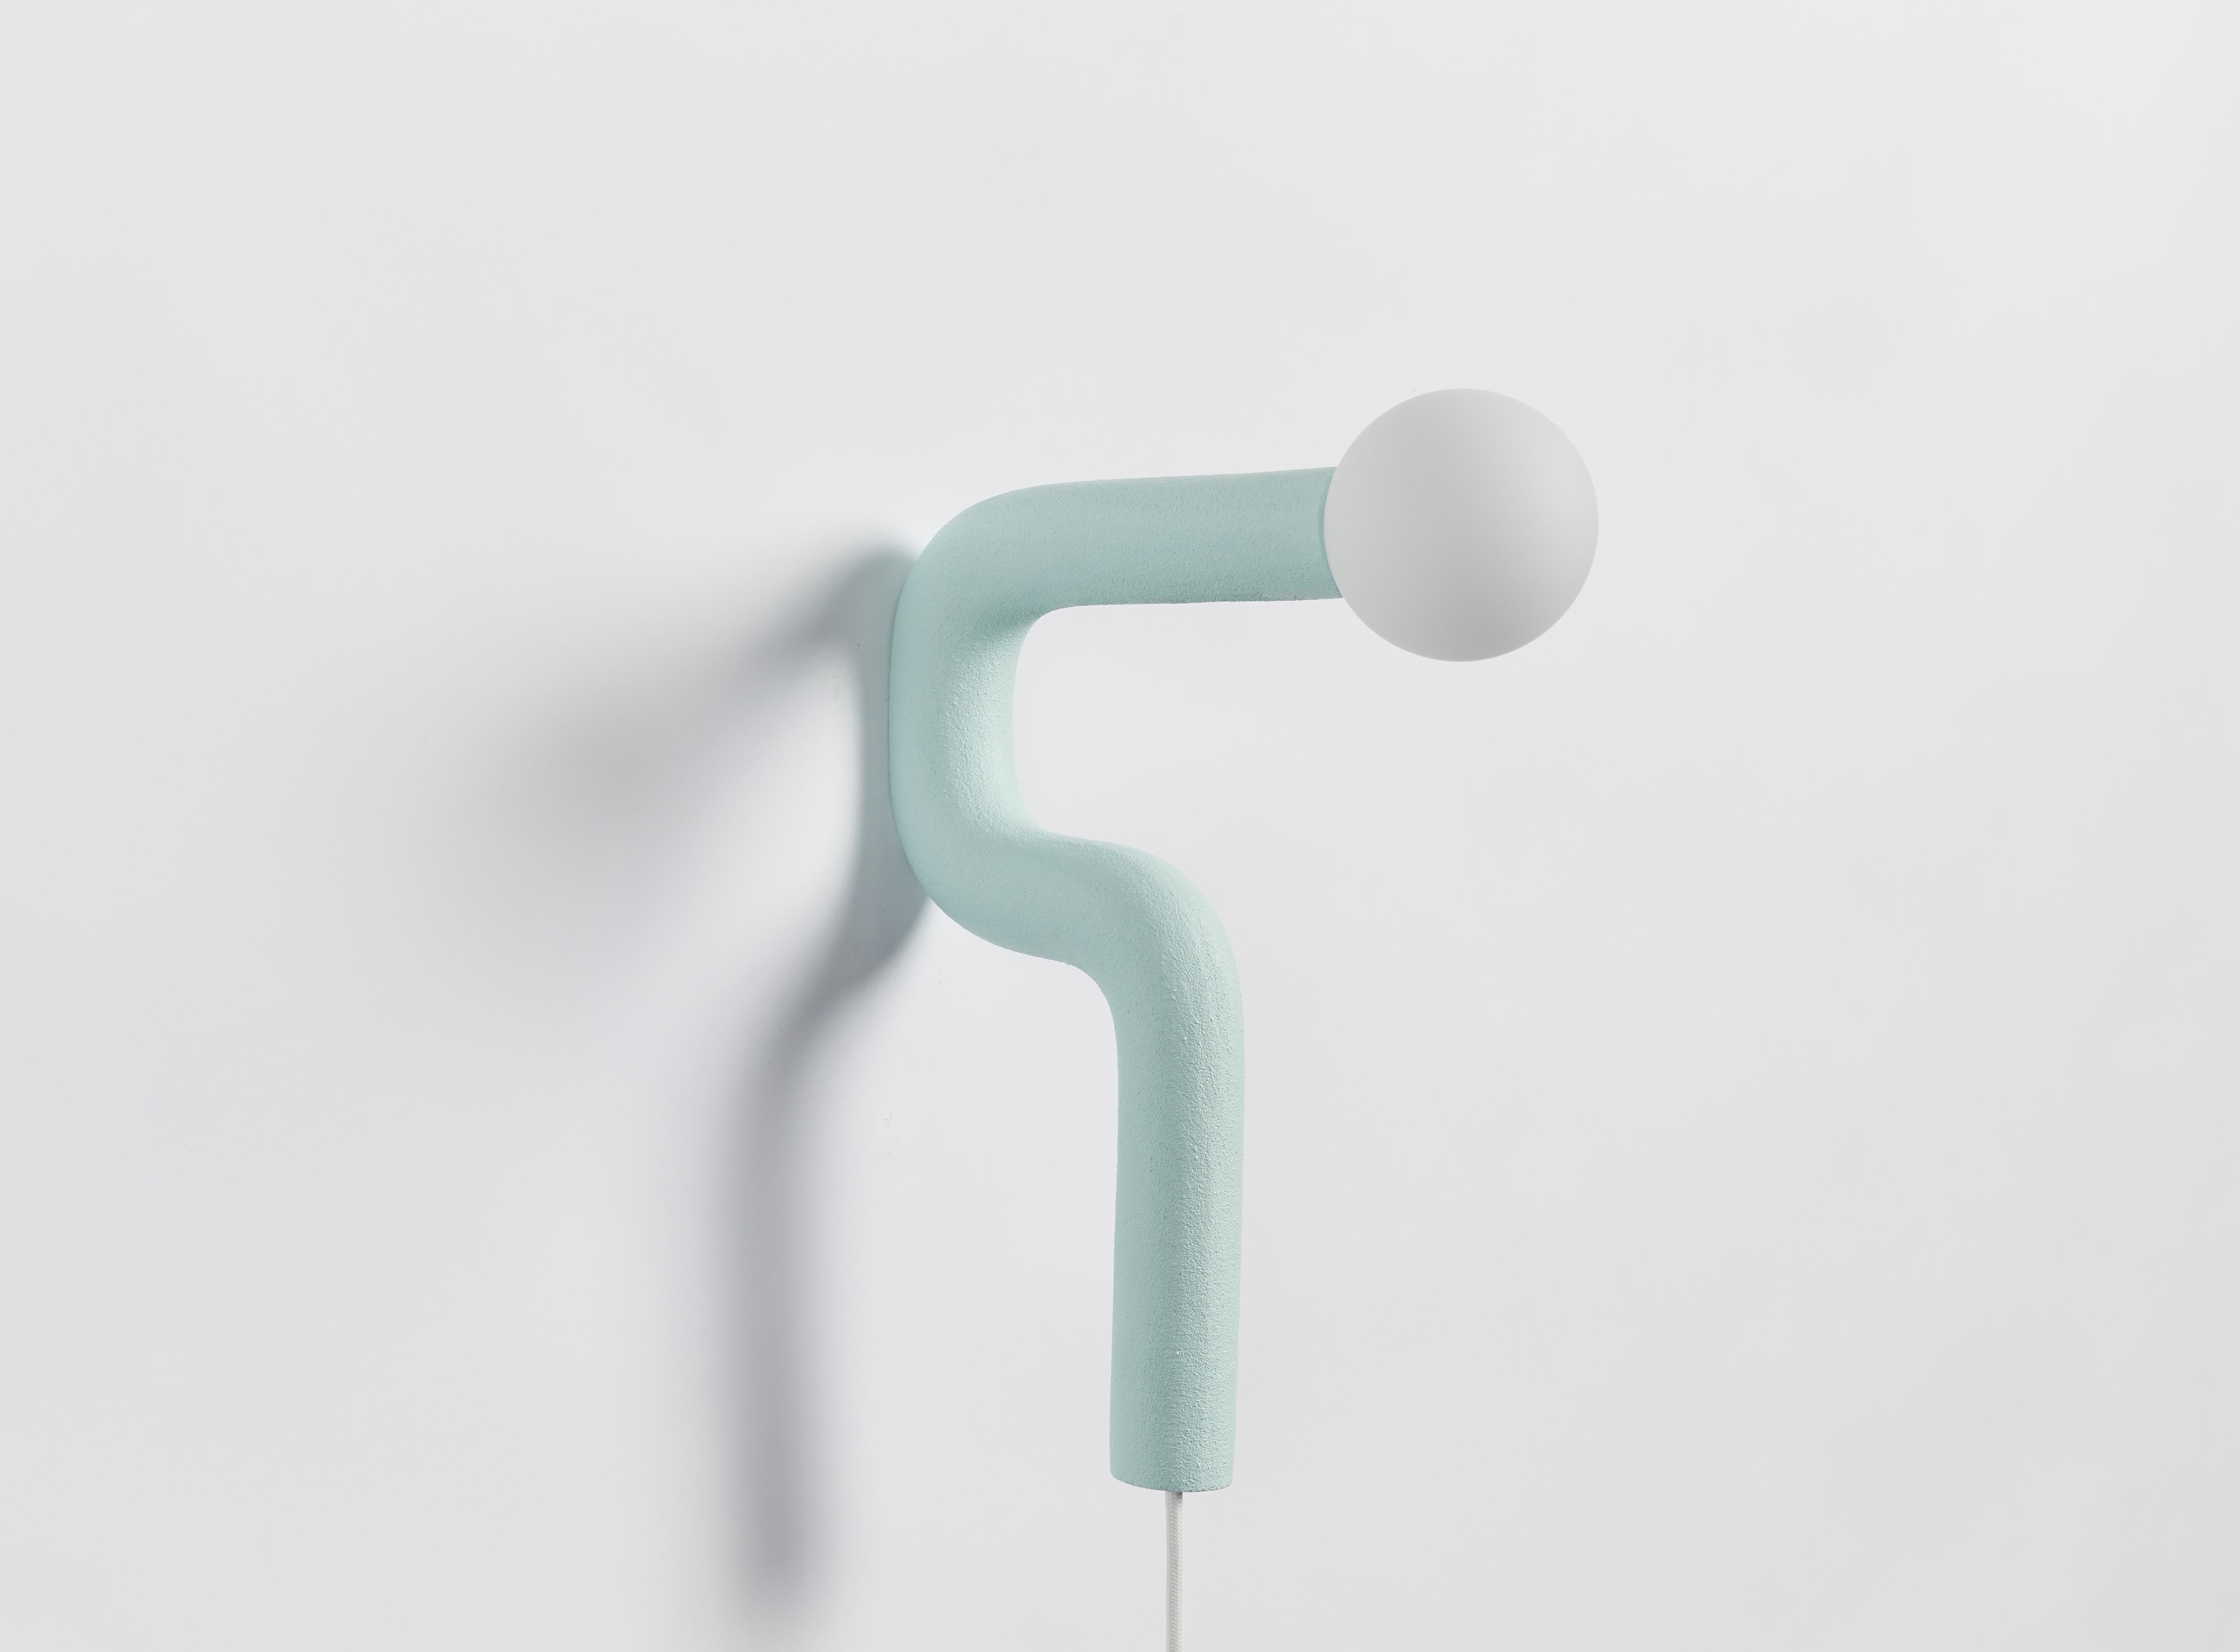 Hotel light 03 wall lamp by Hot Wire Extensions
Limited Edition
Materials: Waste SLS 3D nylon powder, Sand from sustainable sources
Dimensions: L 8.5 x W 29 x H 38 cm 
Colour: aqua
Also available in: anthracite, cream, lemon, pink and grey

All our